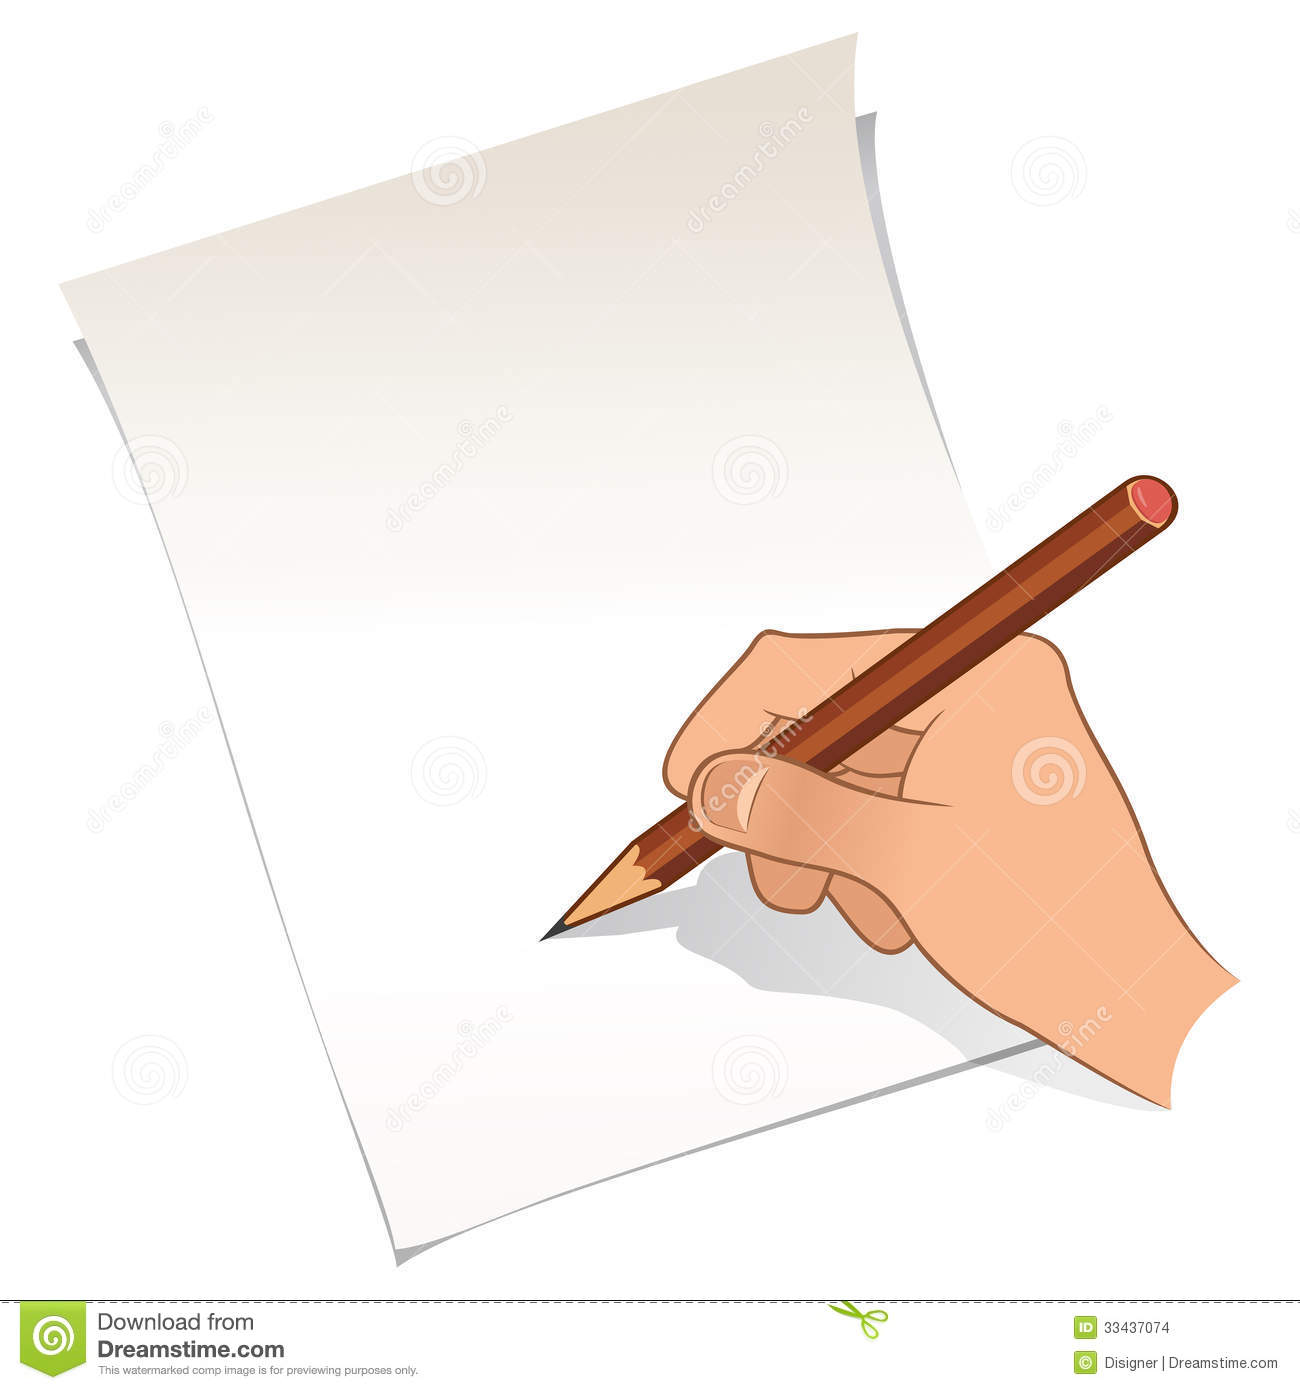 Hand With Pencil And Paper Stock Images   Image  33437074